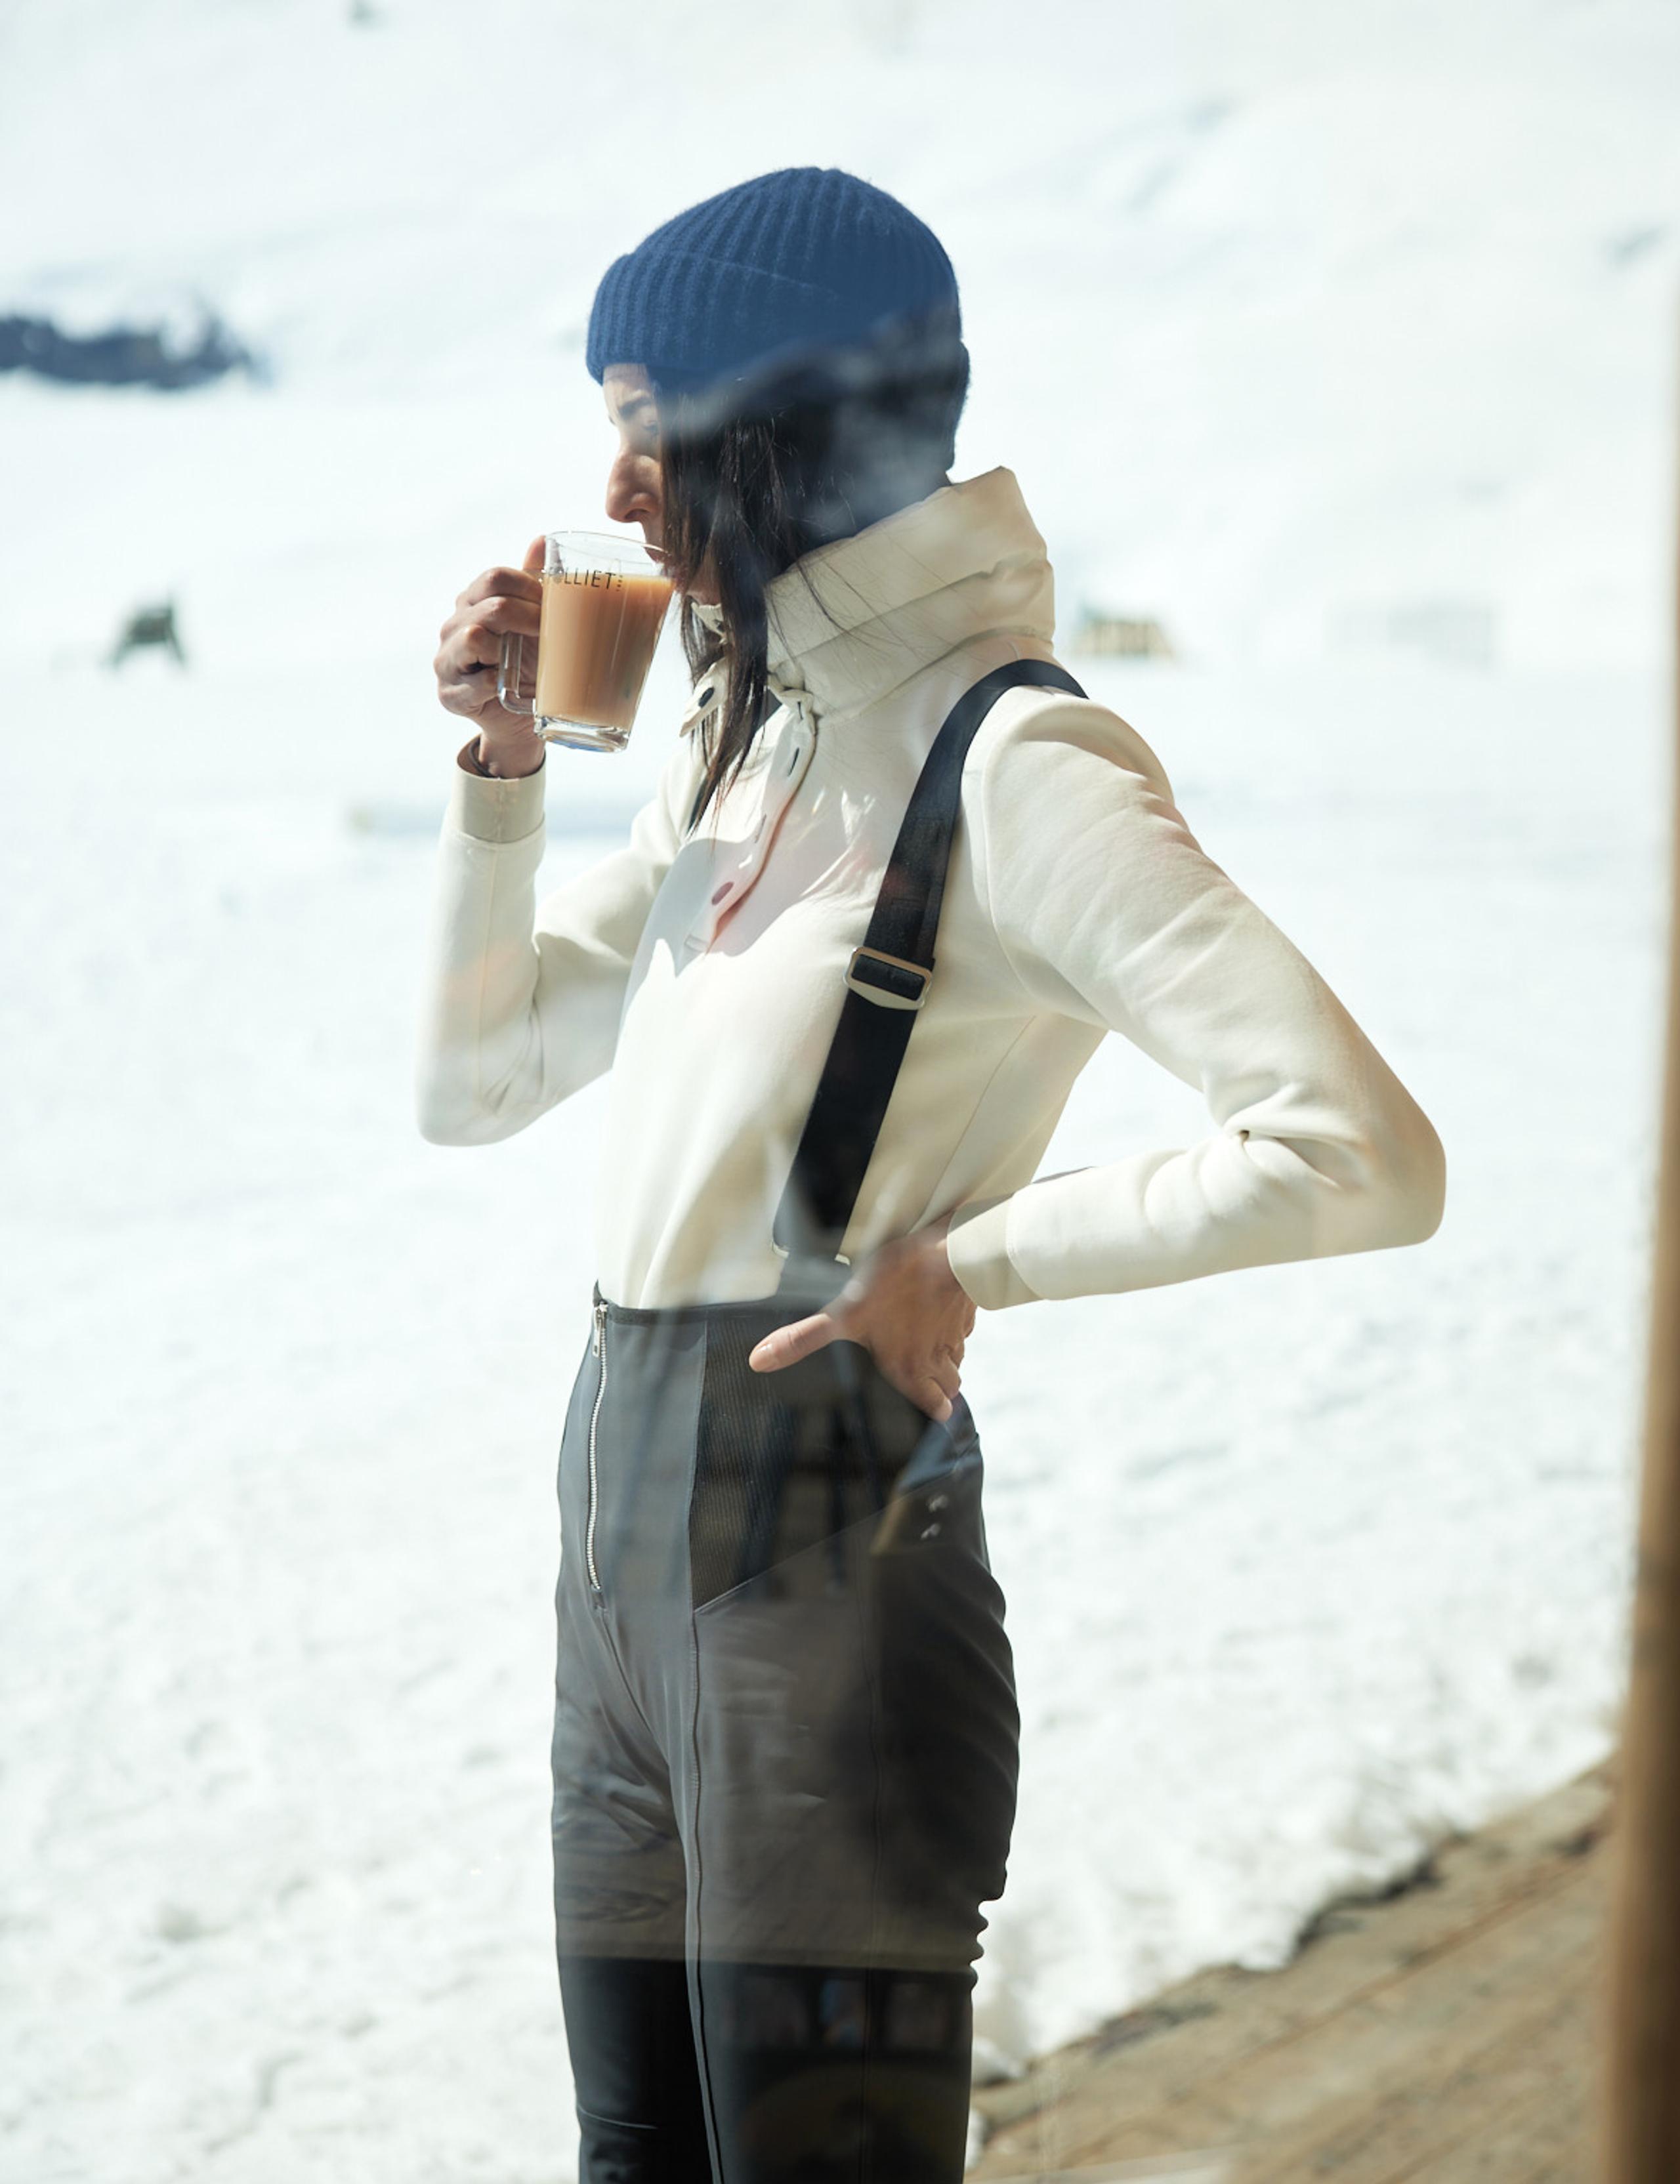 Women in Descent Snow Bib 2.0 sipping coffee 